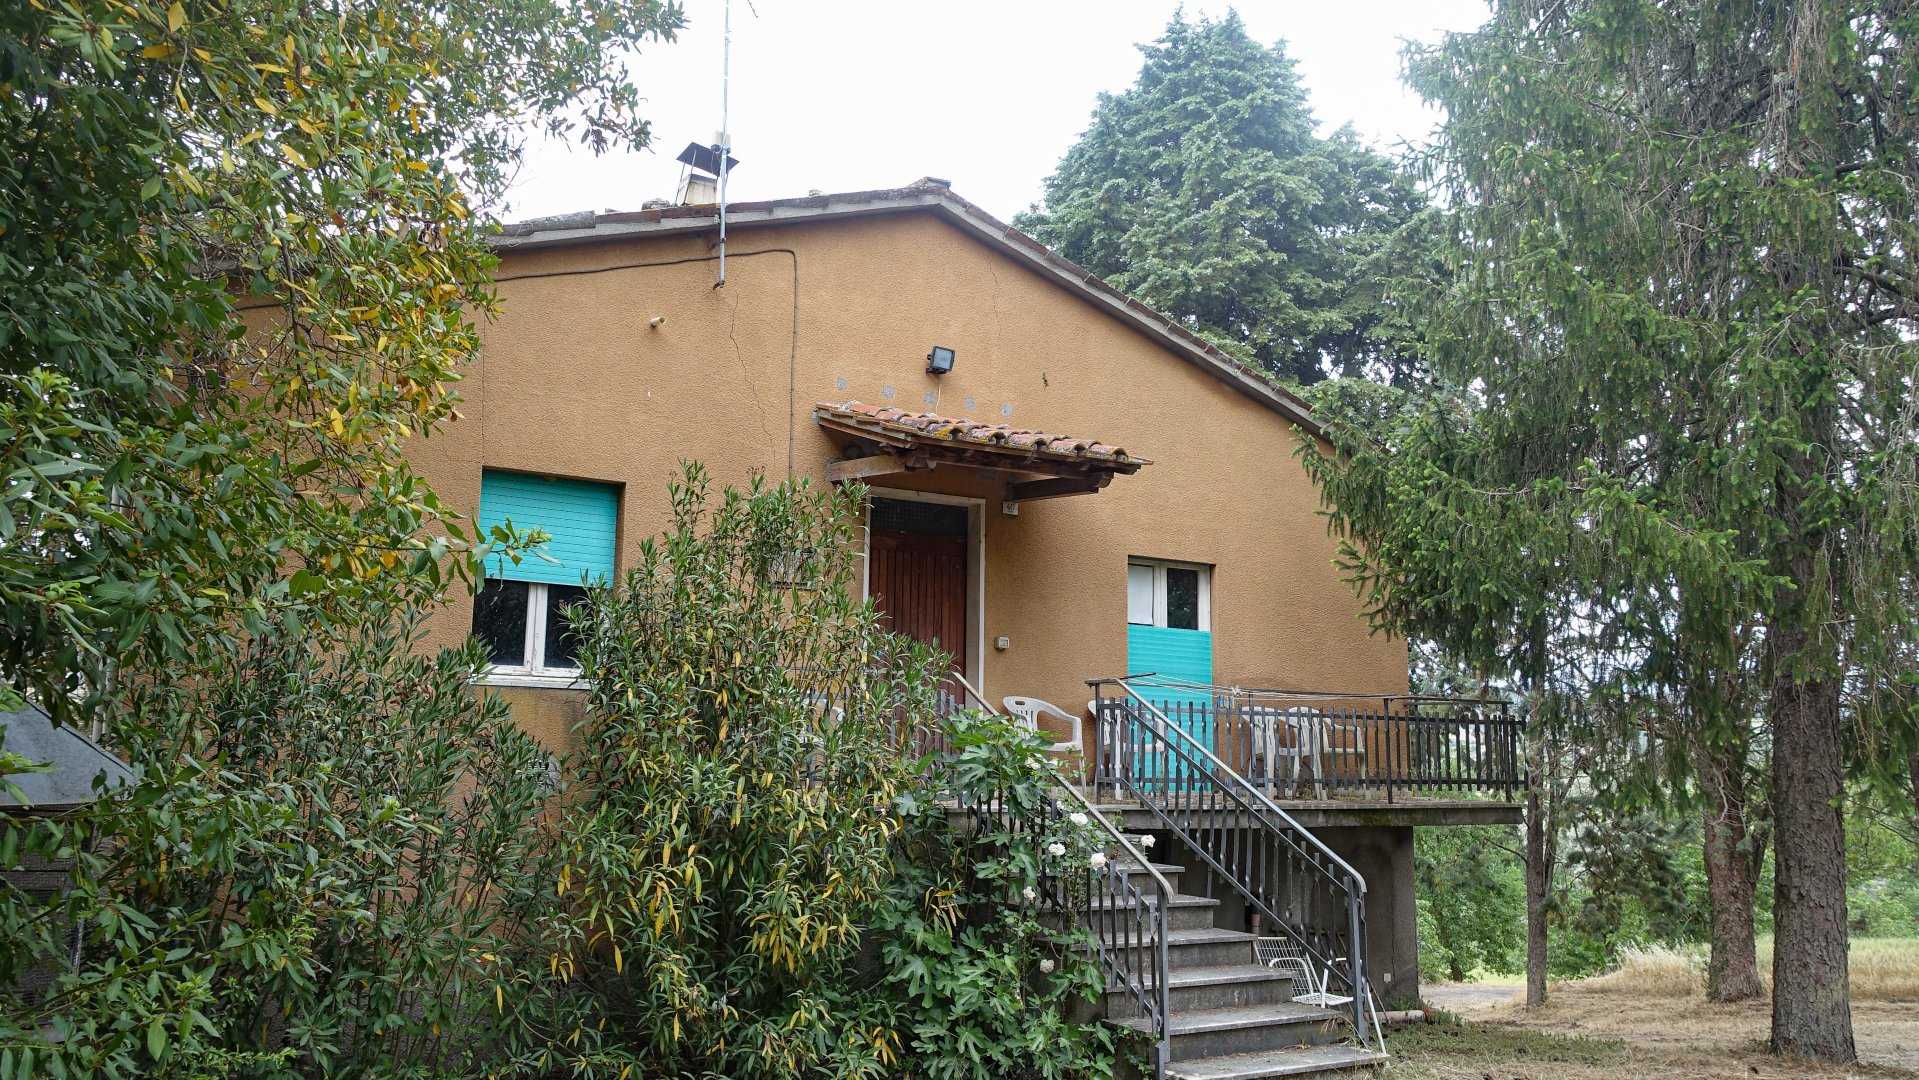 Details of Todi, independent house with garden and stunning views - IUM36913